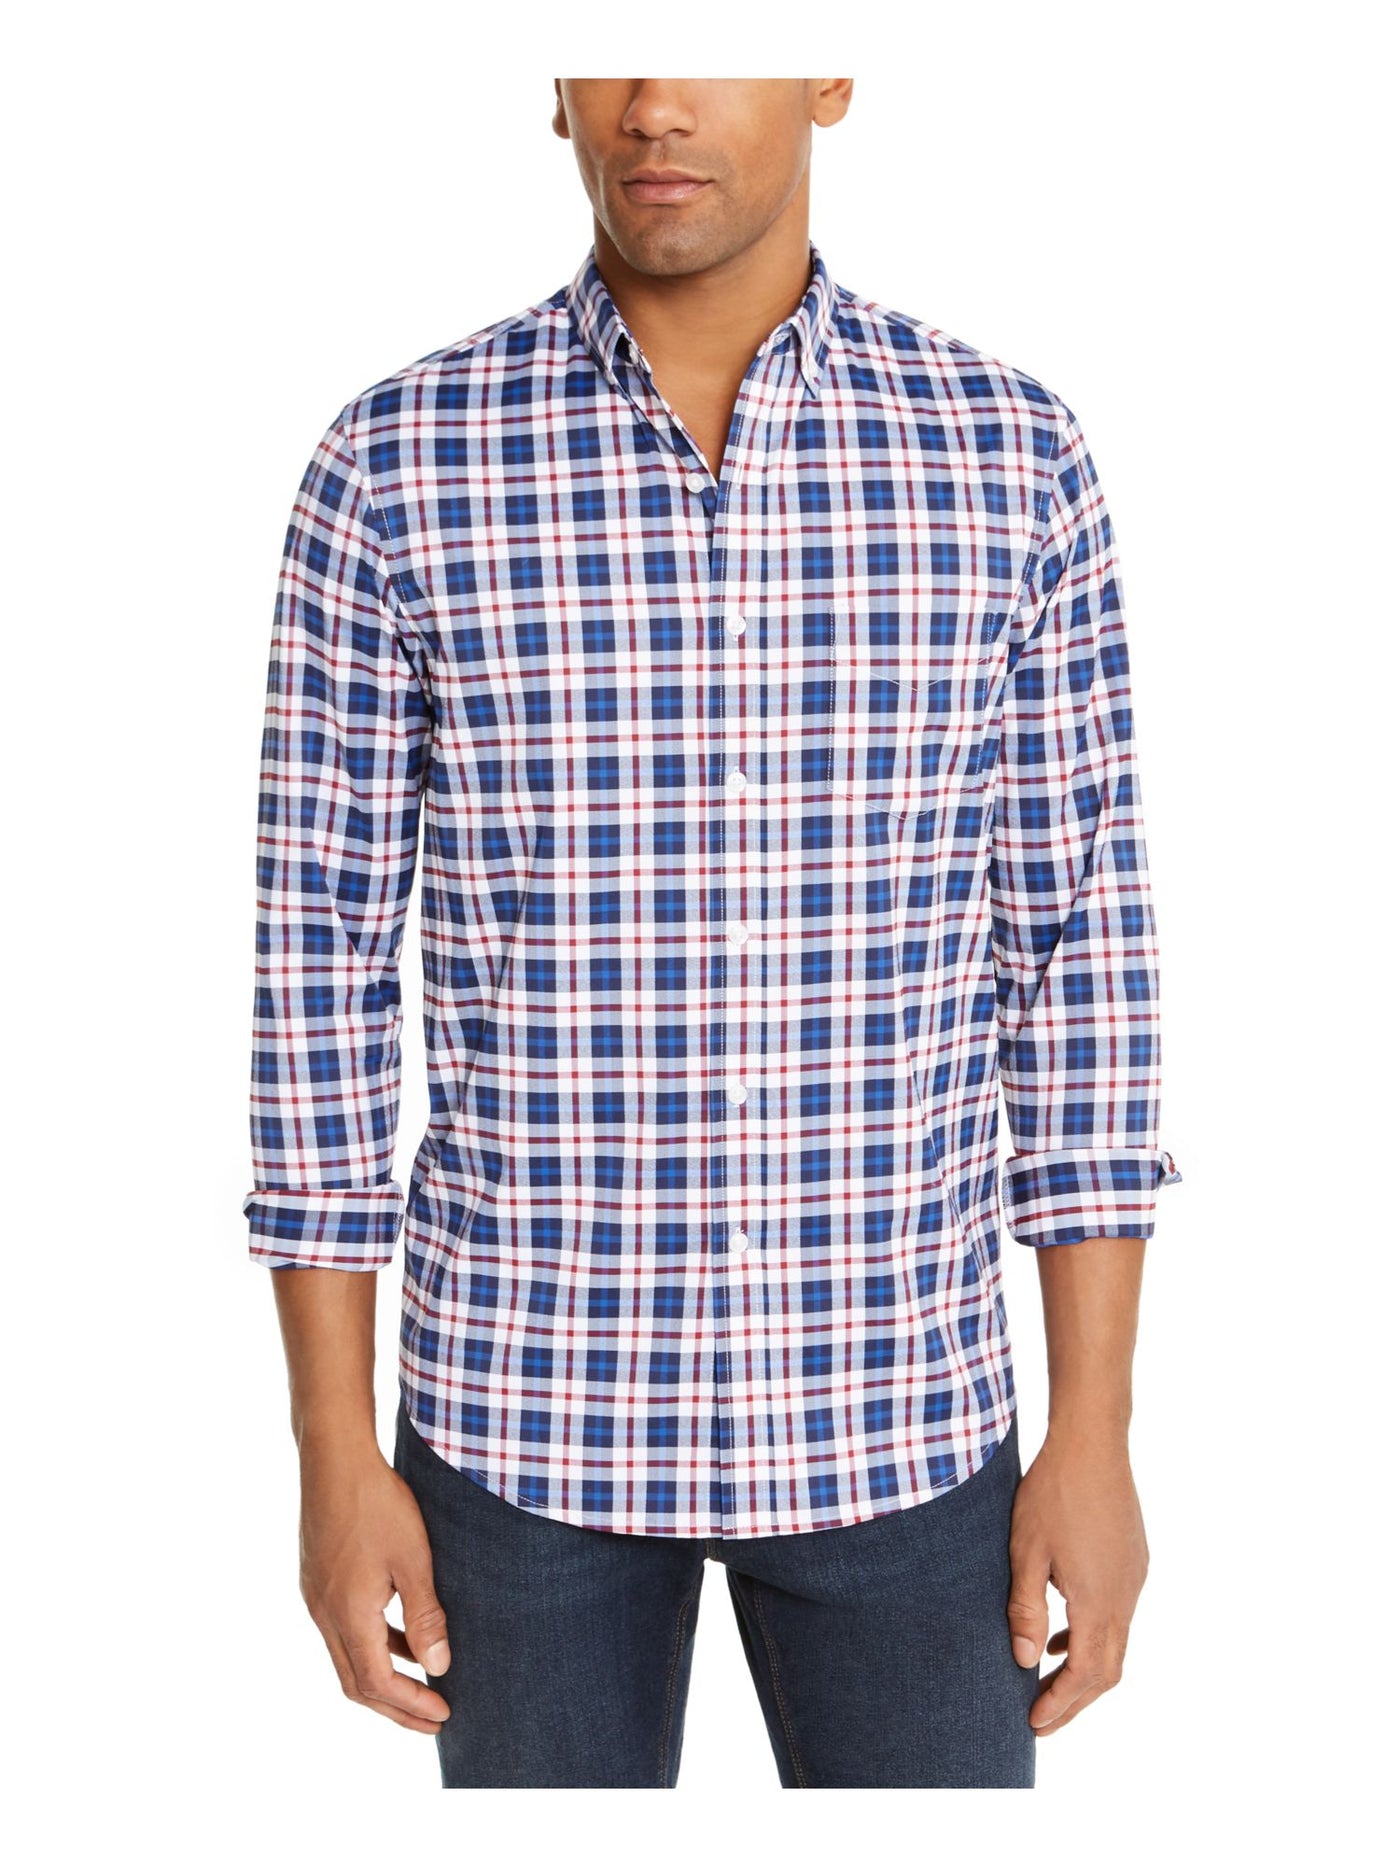 CLUBROOM Mens Navy Plaid Collared Button Down Shirt S